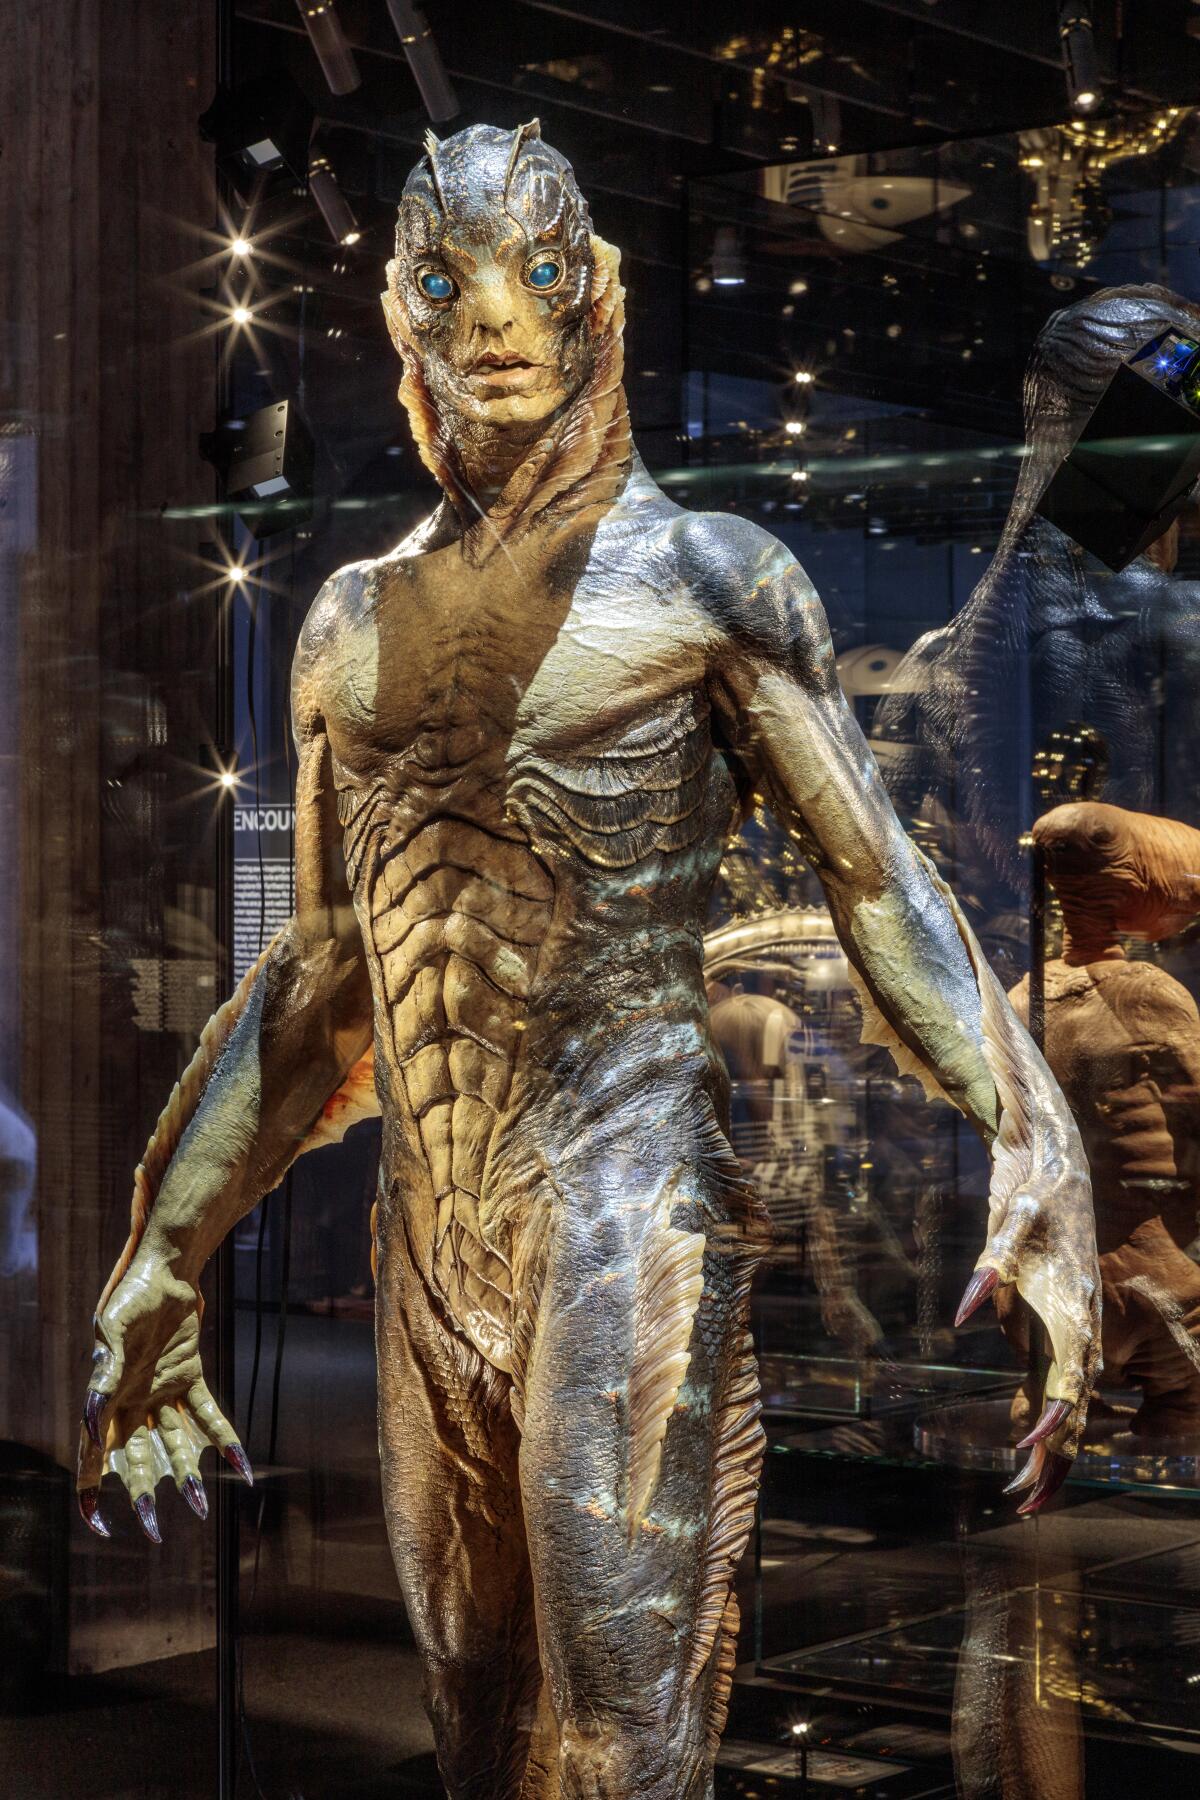 Prosthetic suit worn by Doug Jones as the amphibian man from "The Shape of Water" (2017).